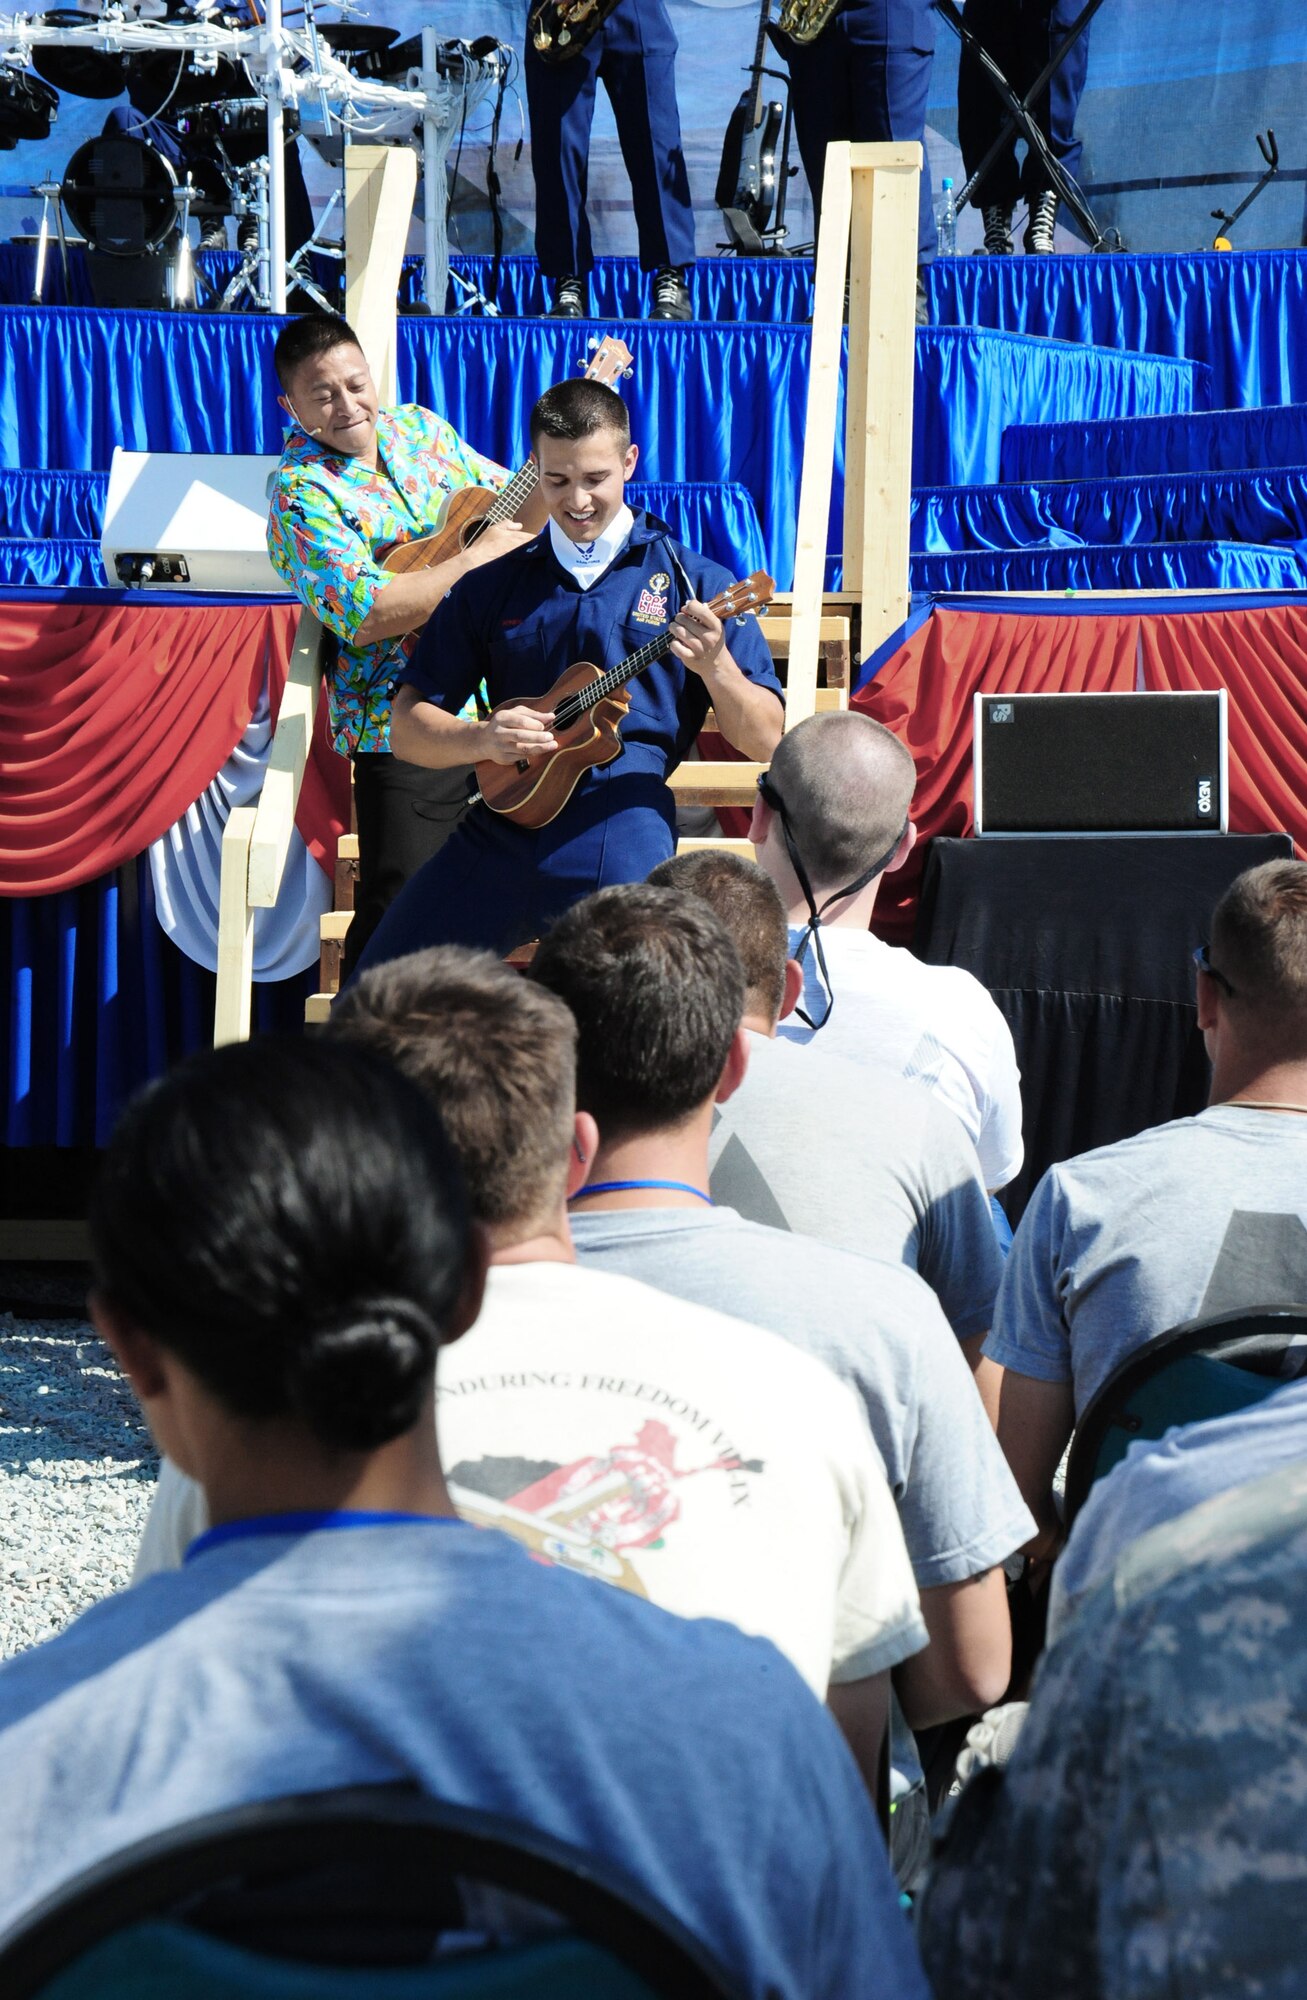 Master Sgt. Herbert Ancog and Airman 1st Class Shane Jones take the audience on a musical journey to Hawaii with floral-print shirts and ukuleles July 10 at Manas Air Base, Kyrgyzstan. (U.S. Air Force photo/Staff Sgt. Olufemi Owolabi) 